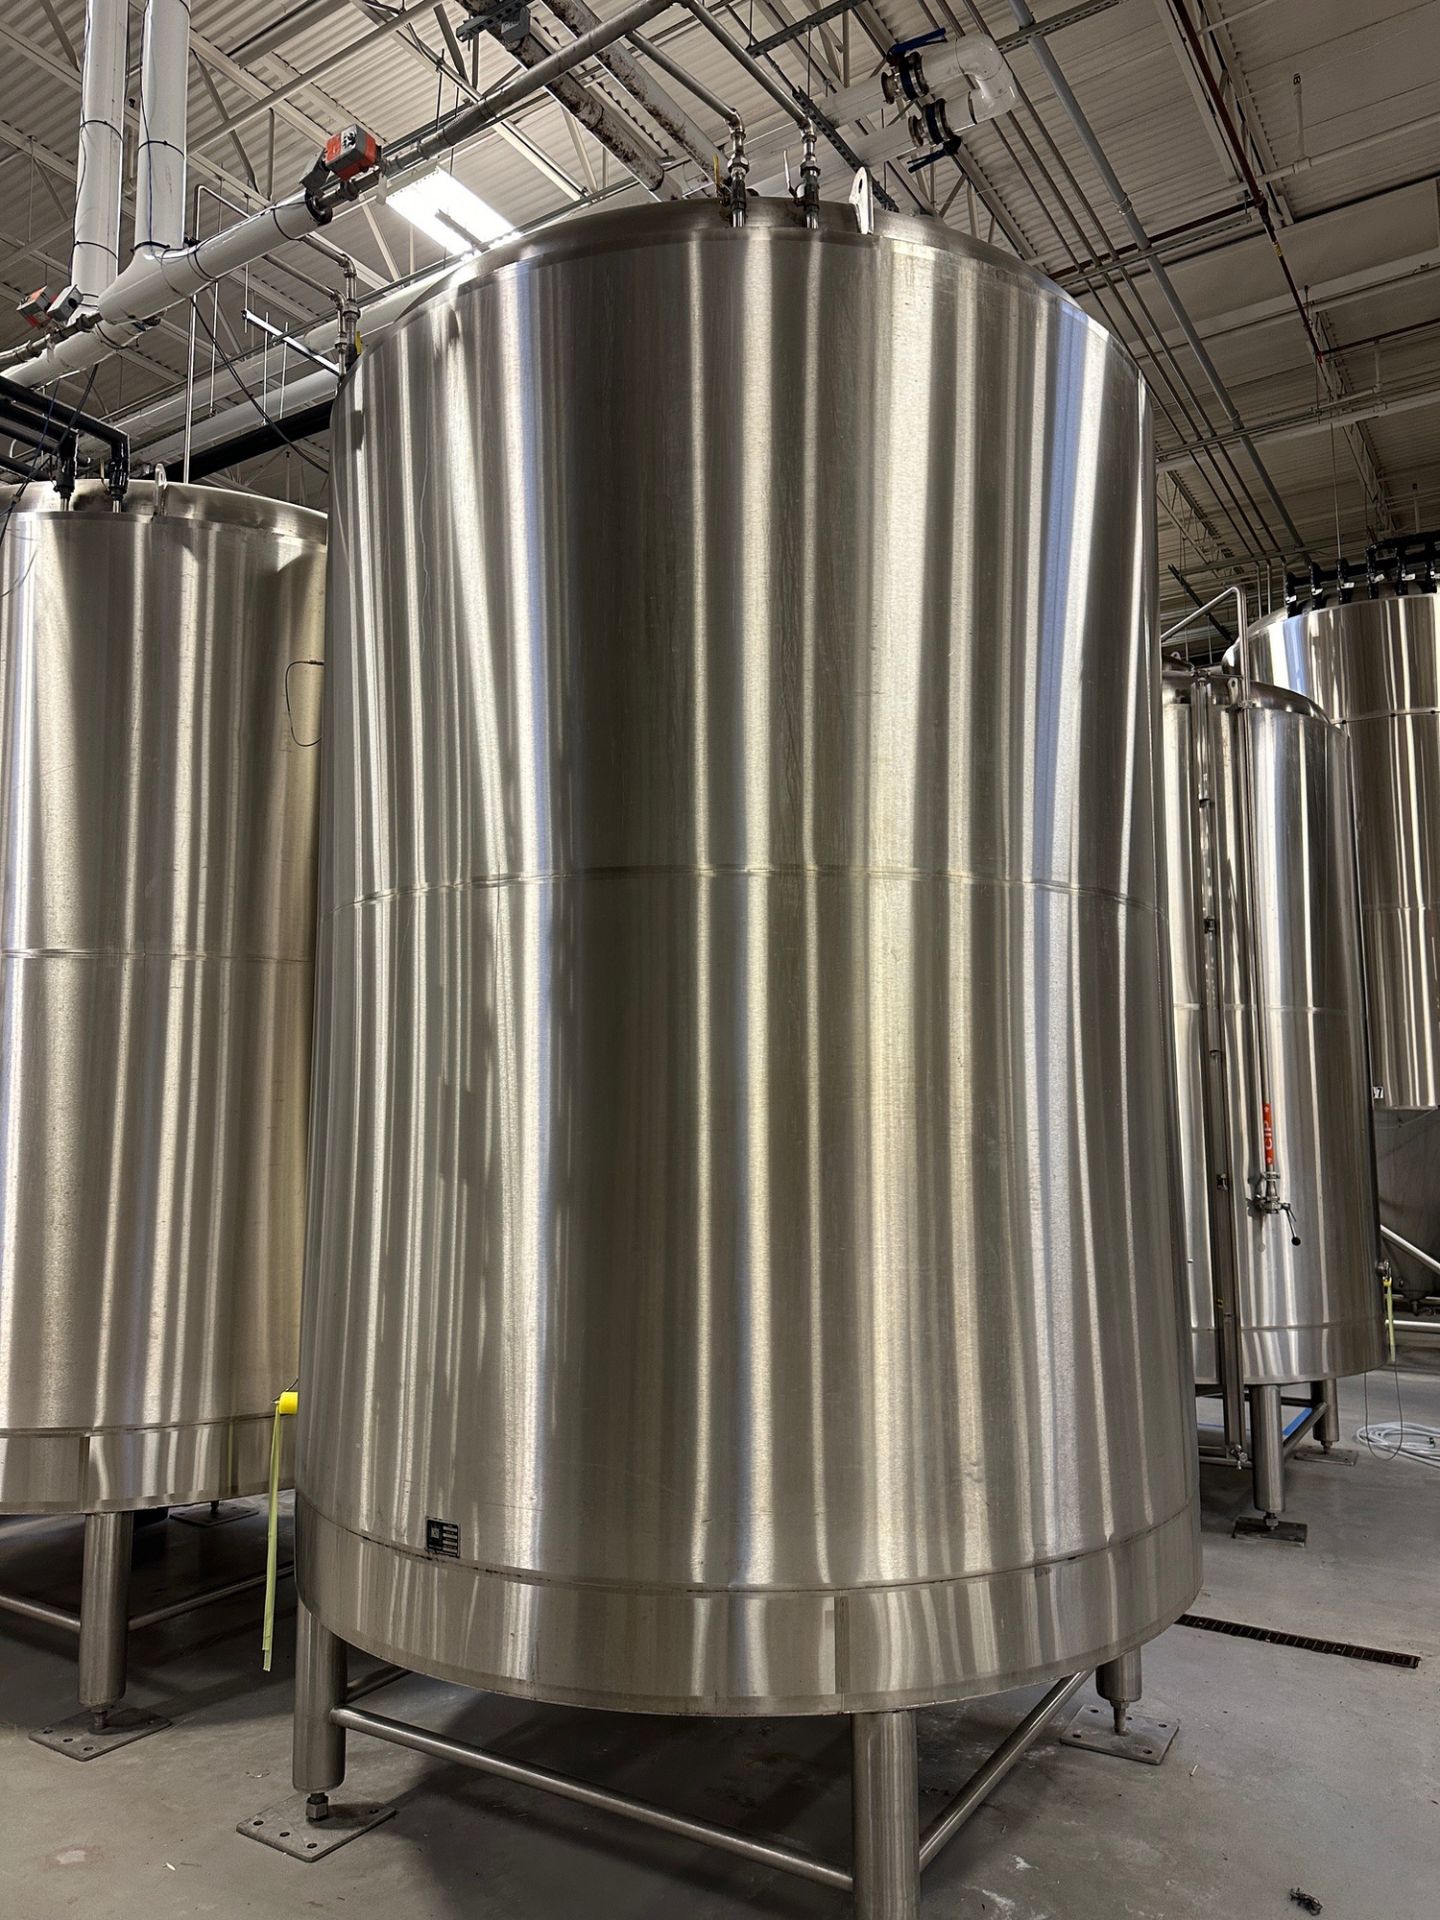 (1 of 2) 2016 NSI 120 BBL Brite / 132 BBL or 4,400 Gal Jacketed Dish Bottom Stainless Steel Brite - Image 2 of 3